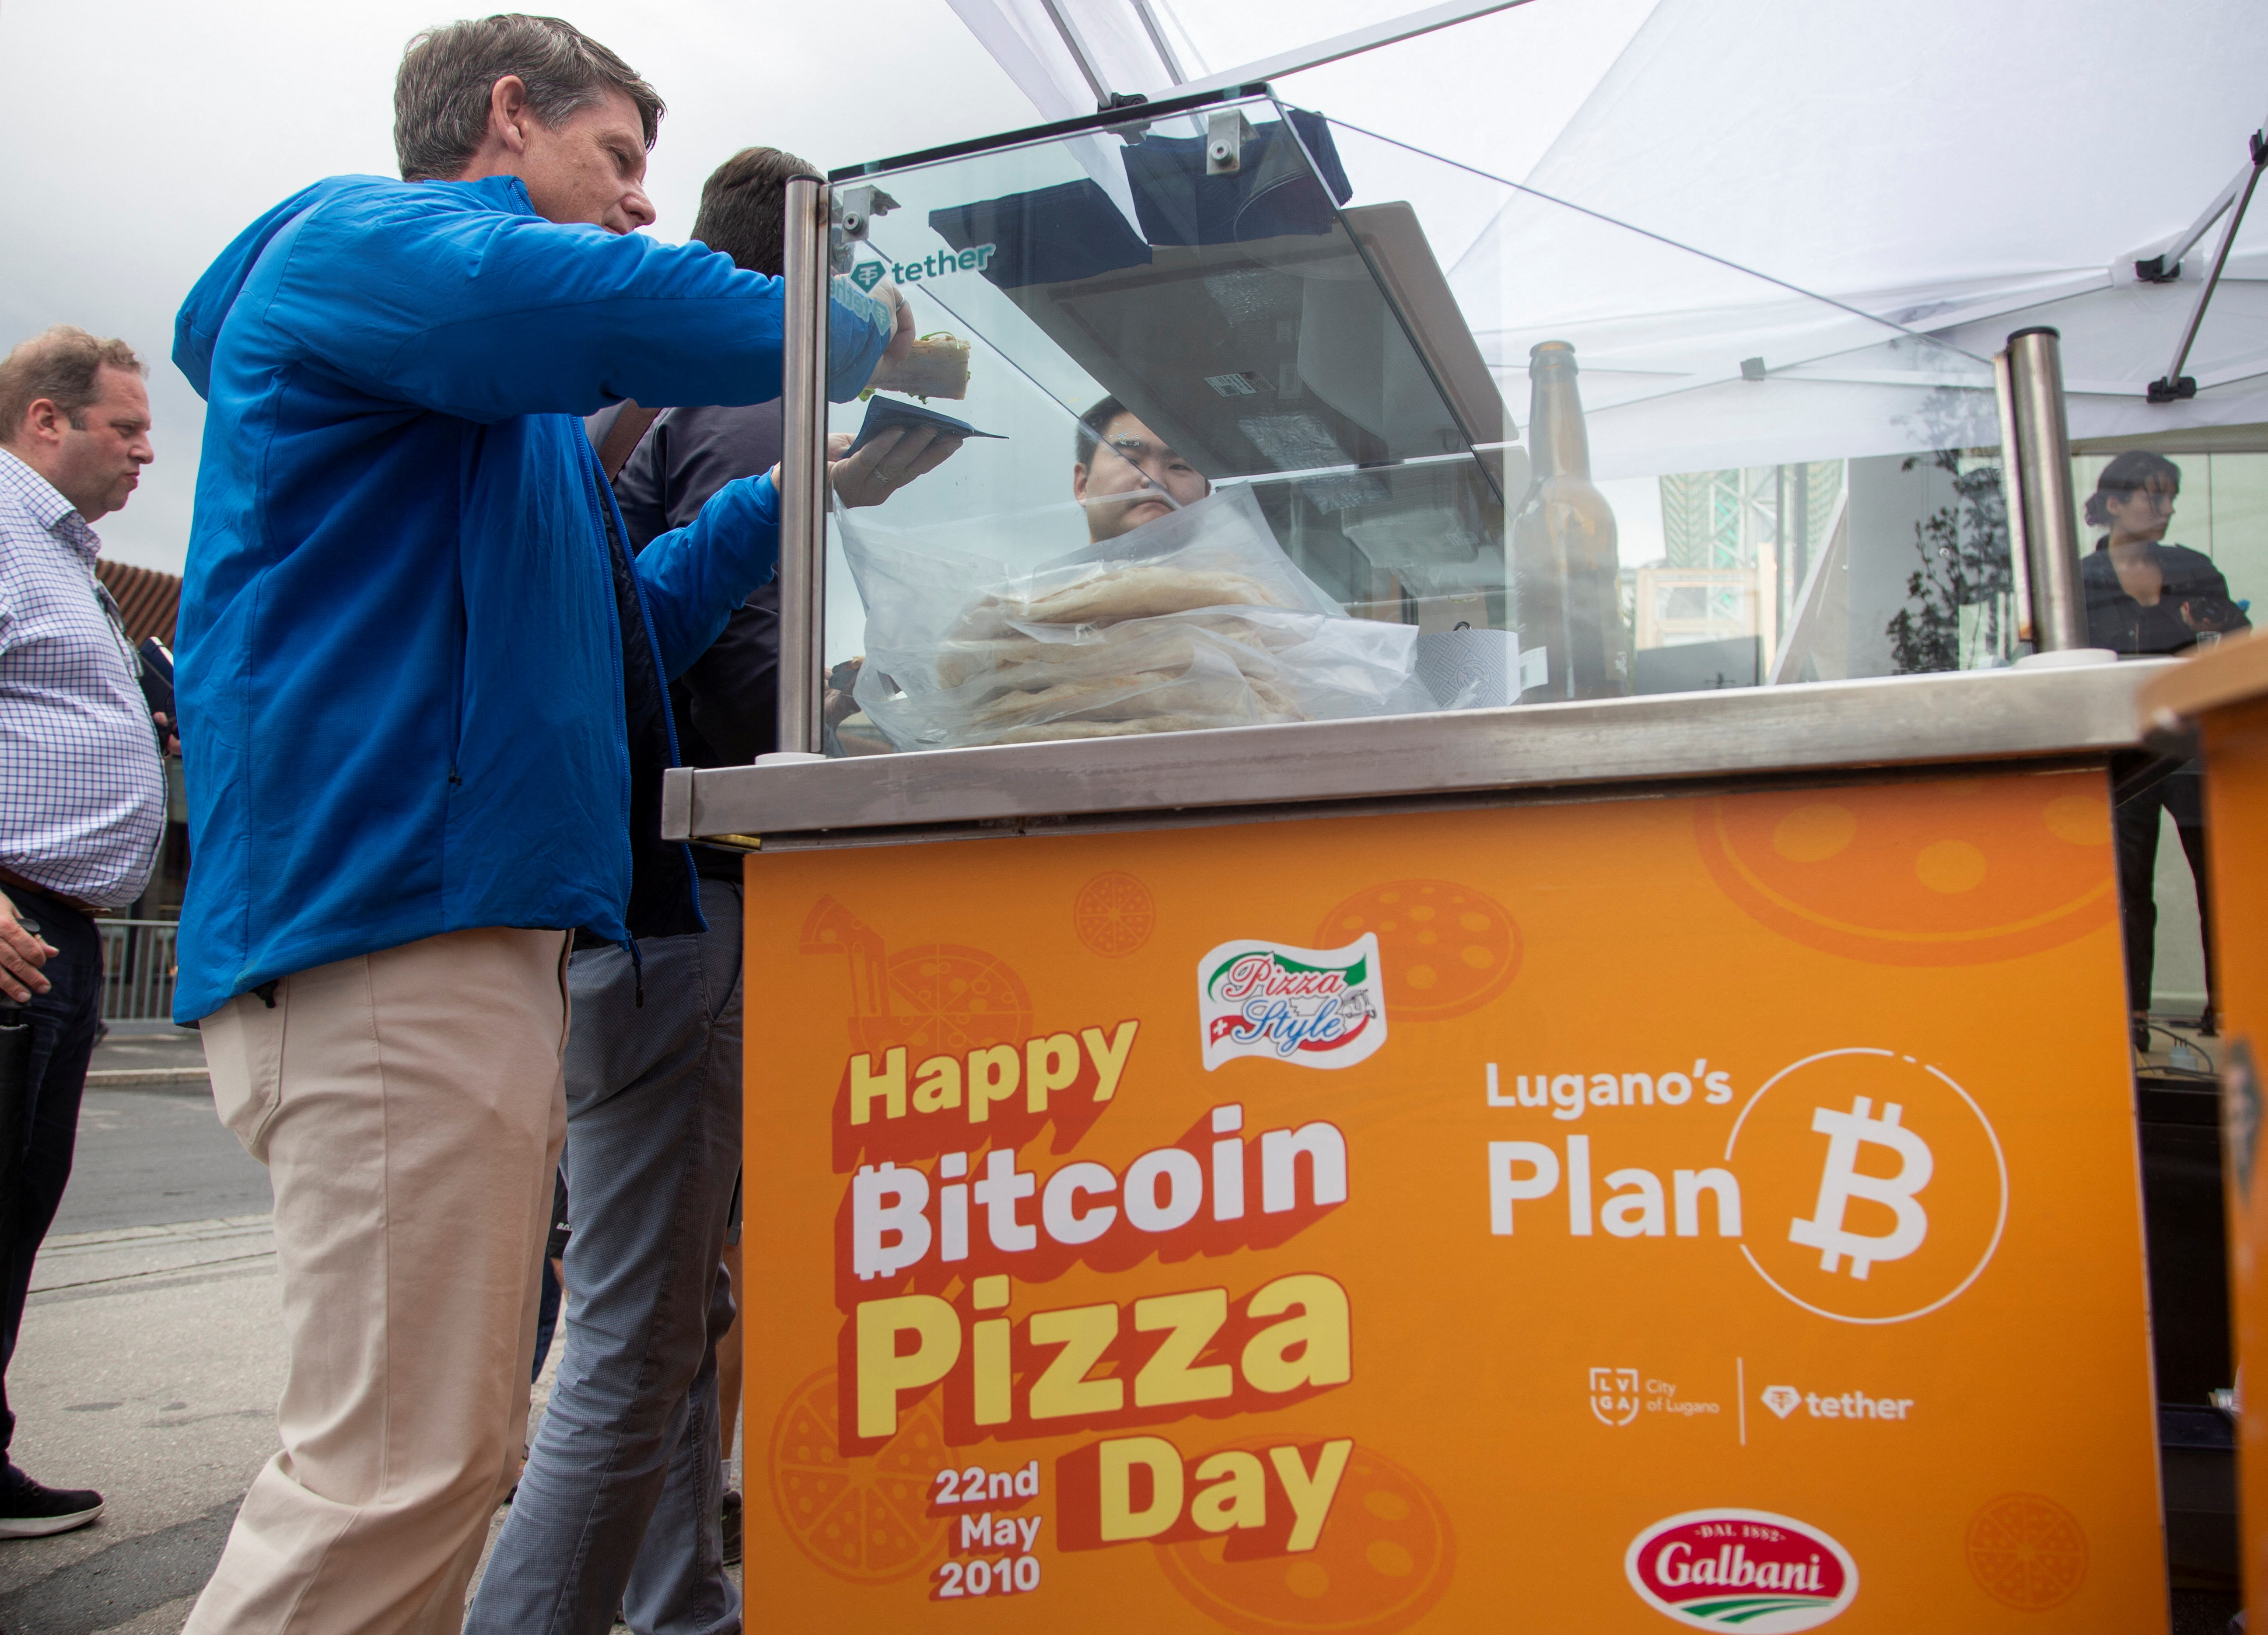 Free pizza is offered during the "Happy Bitcoin Pizza Day" in Davos